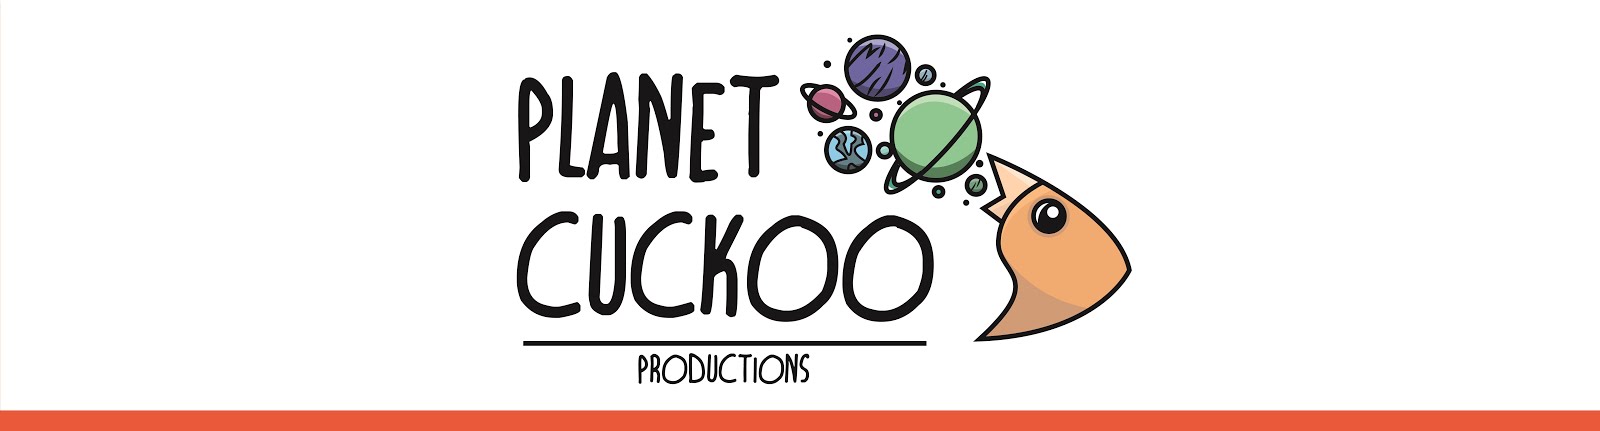 Planet Cuckoo Productions